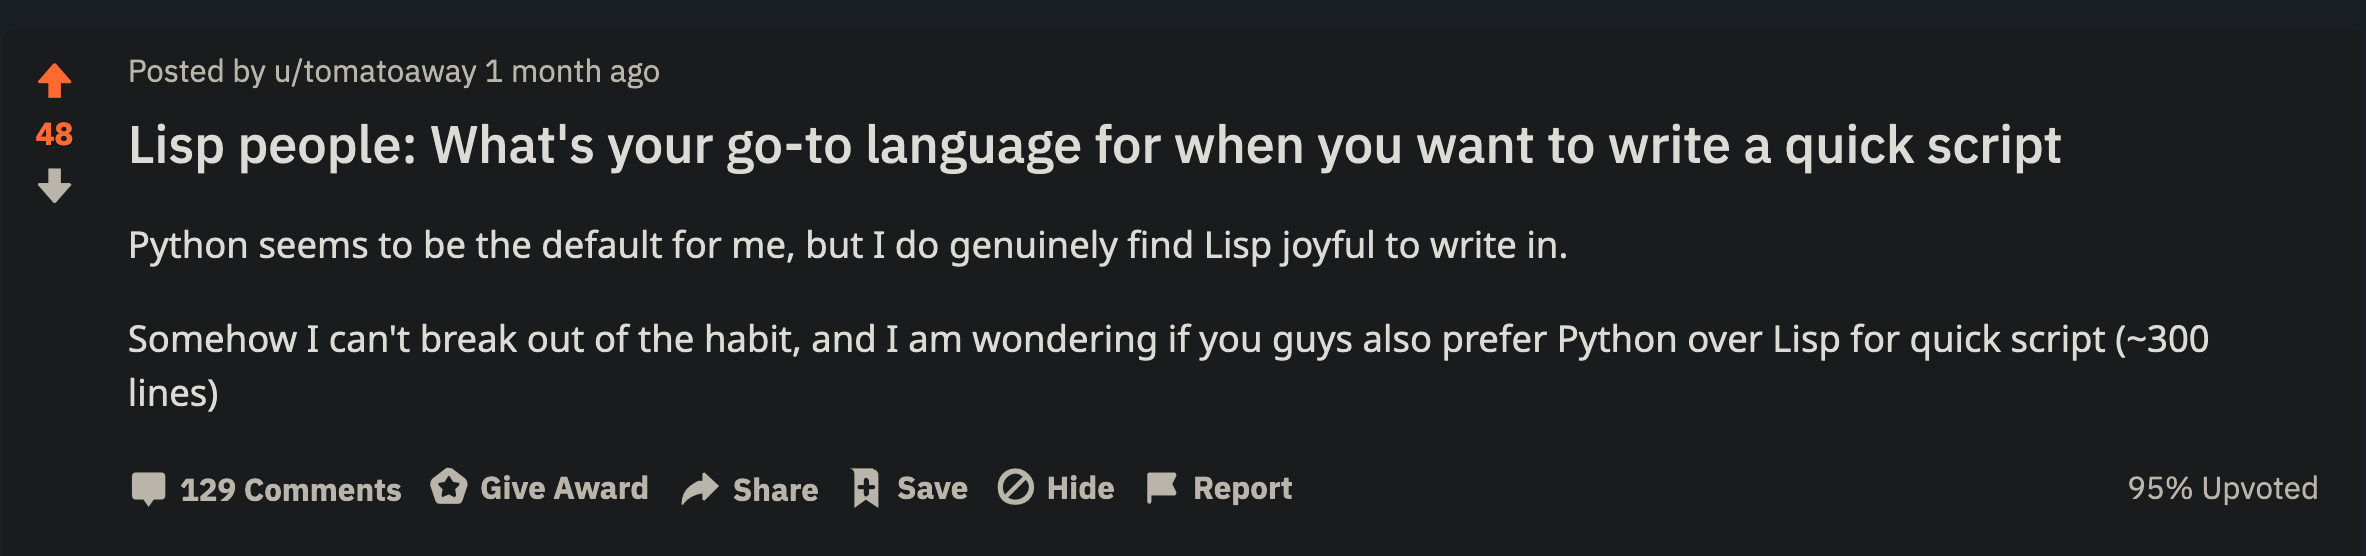 Lisp people: What's your go-to language for when you want to write a quick script.  Python seems to be the default for me, but I do genuinely find Lisp joyful to write in.